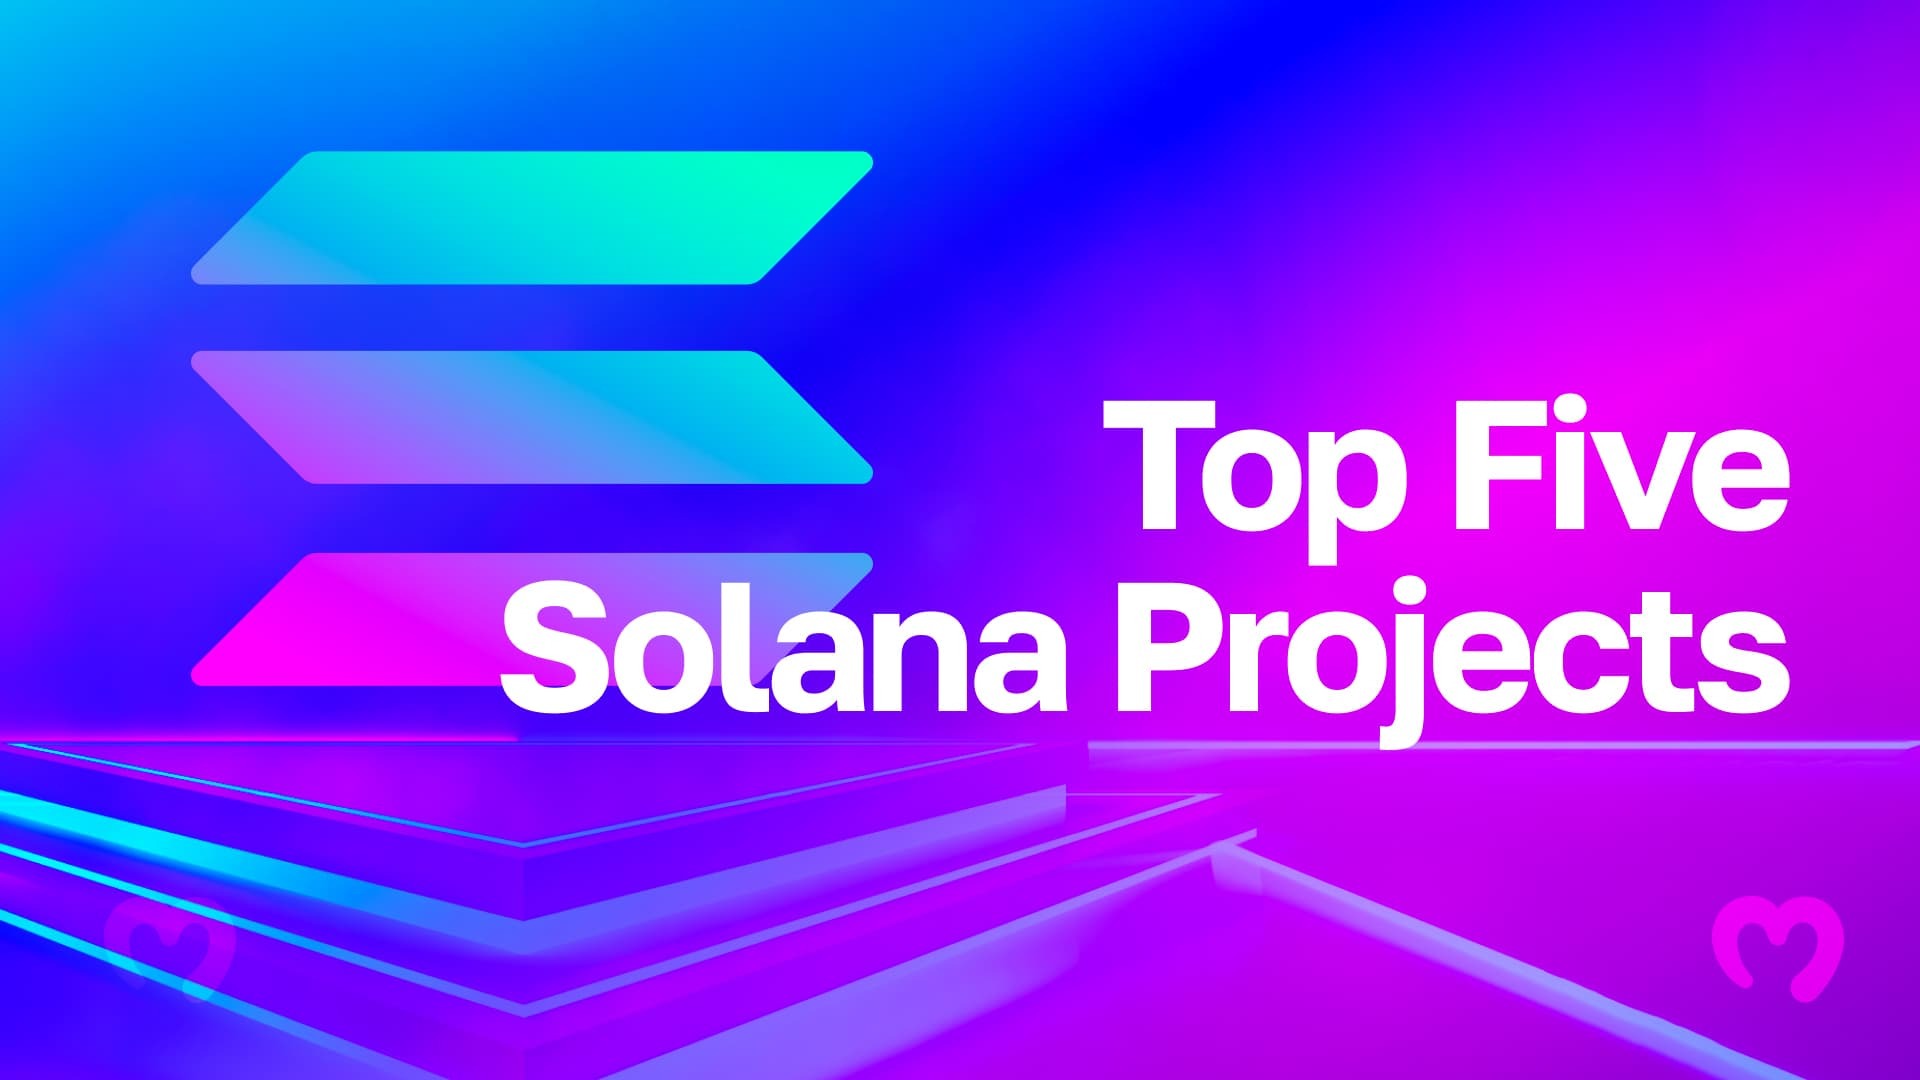 Tokens: These 5 tokens are ready to pump like Solana (SOL) - Times